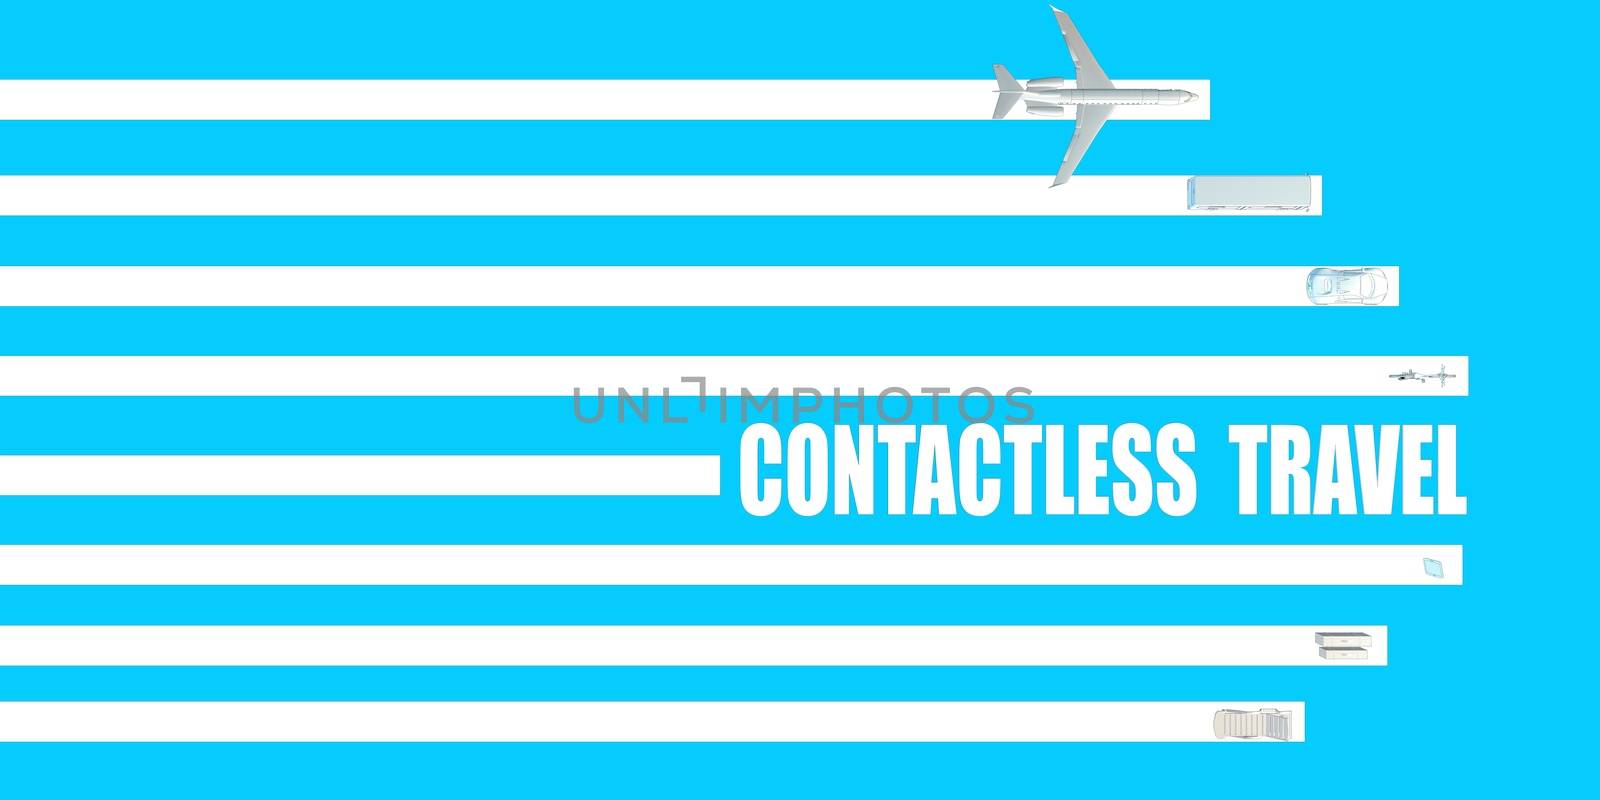 Contactless Travel by kentoh